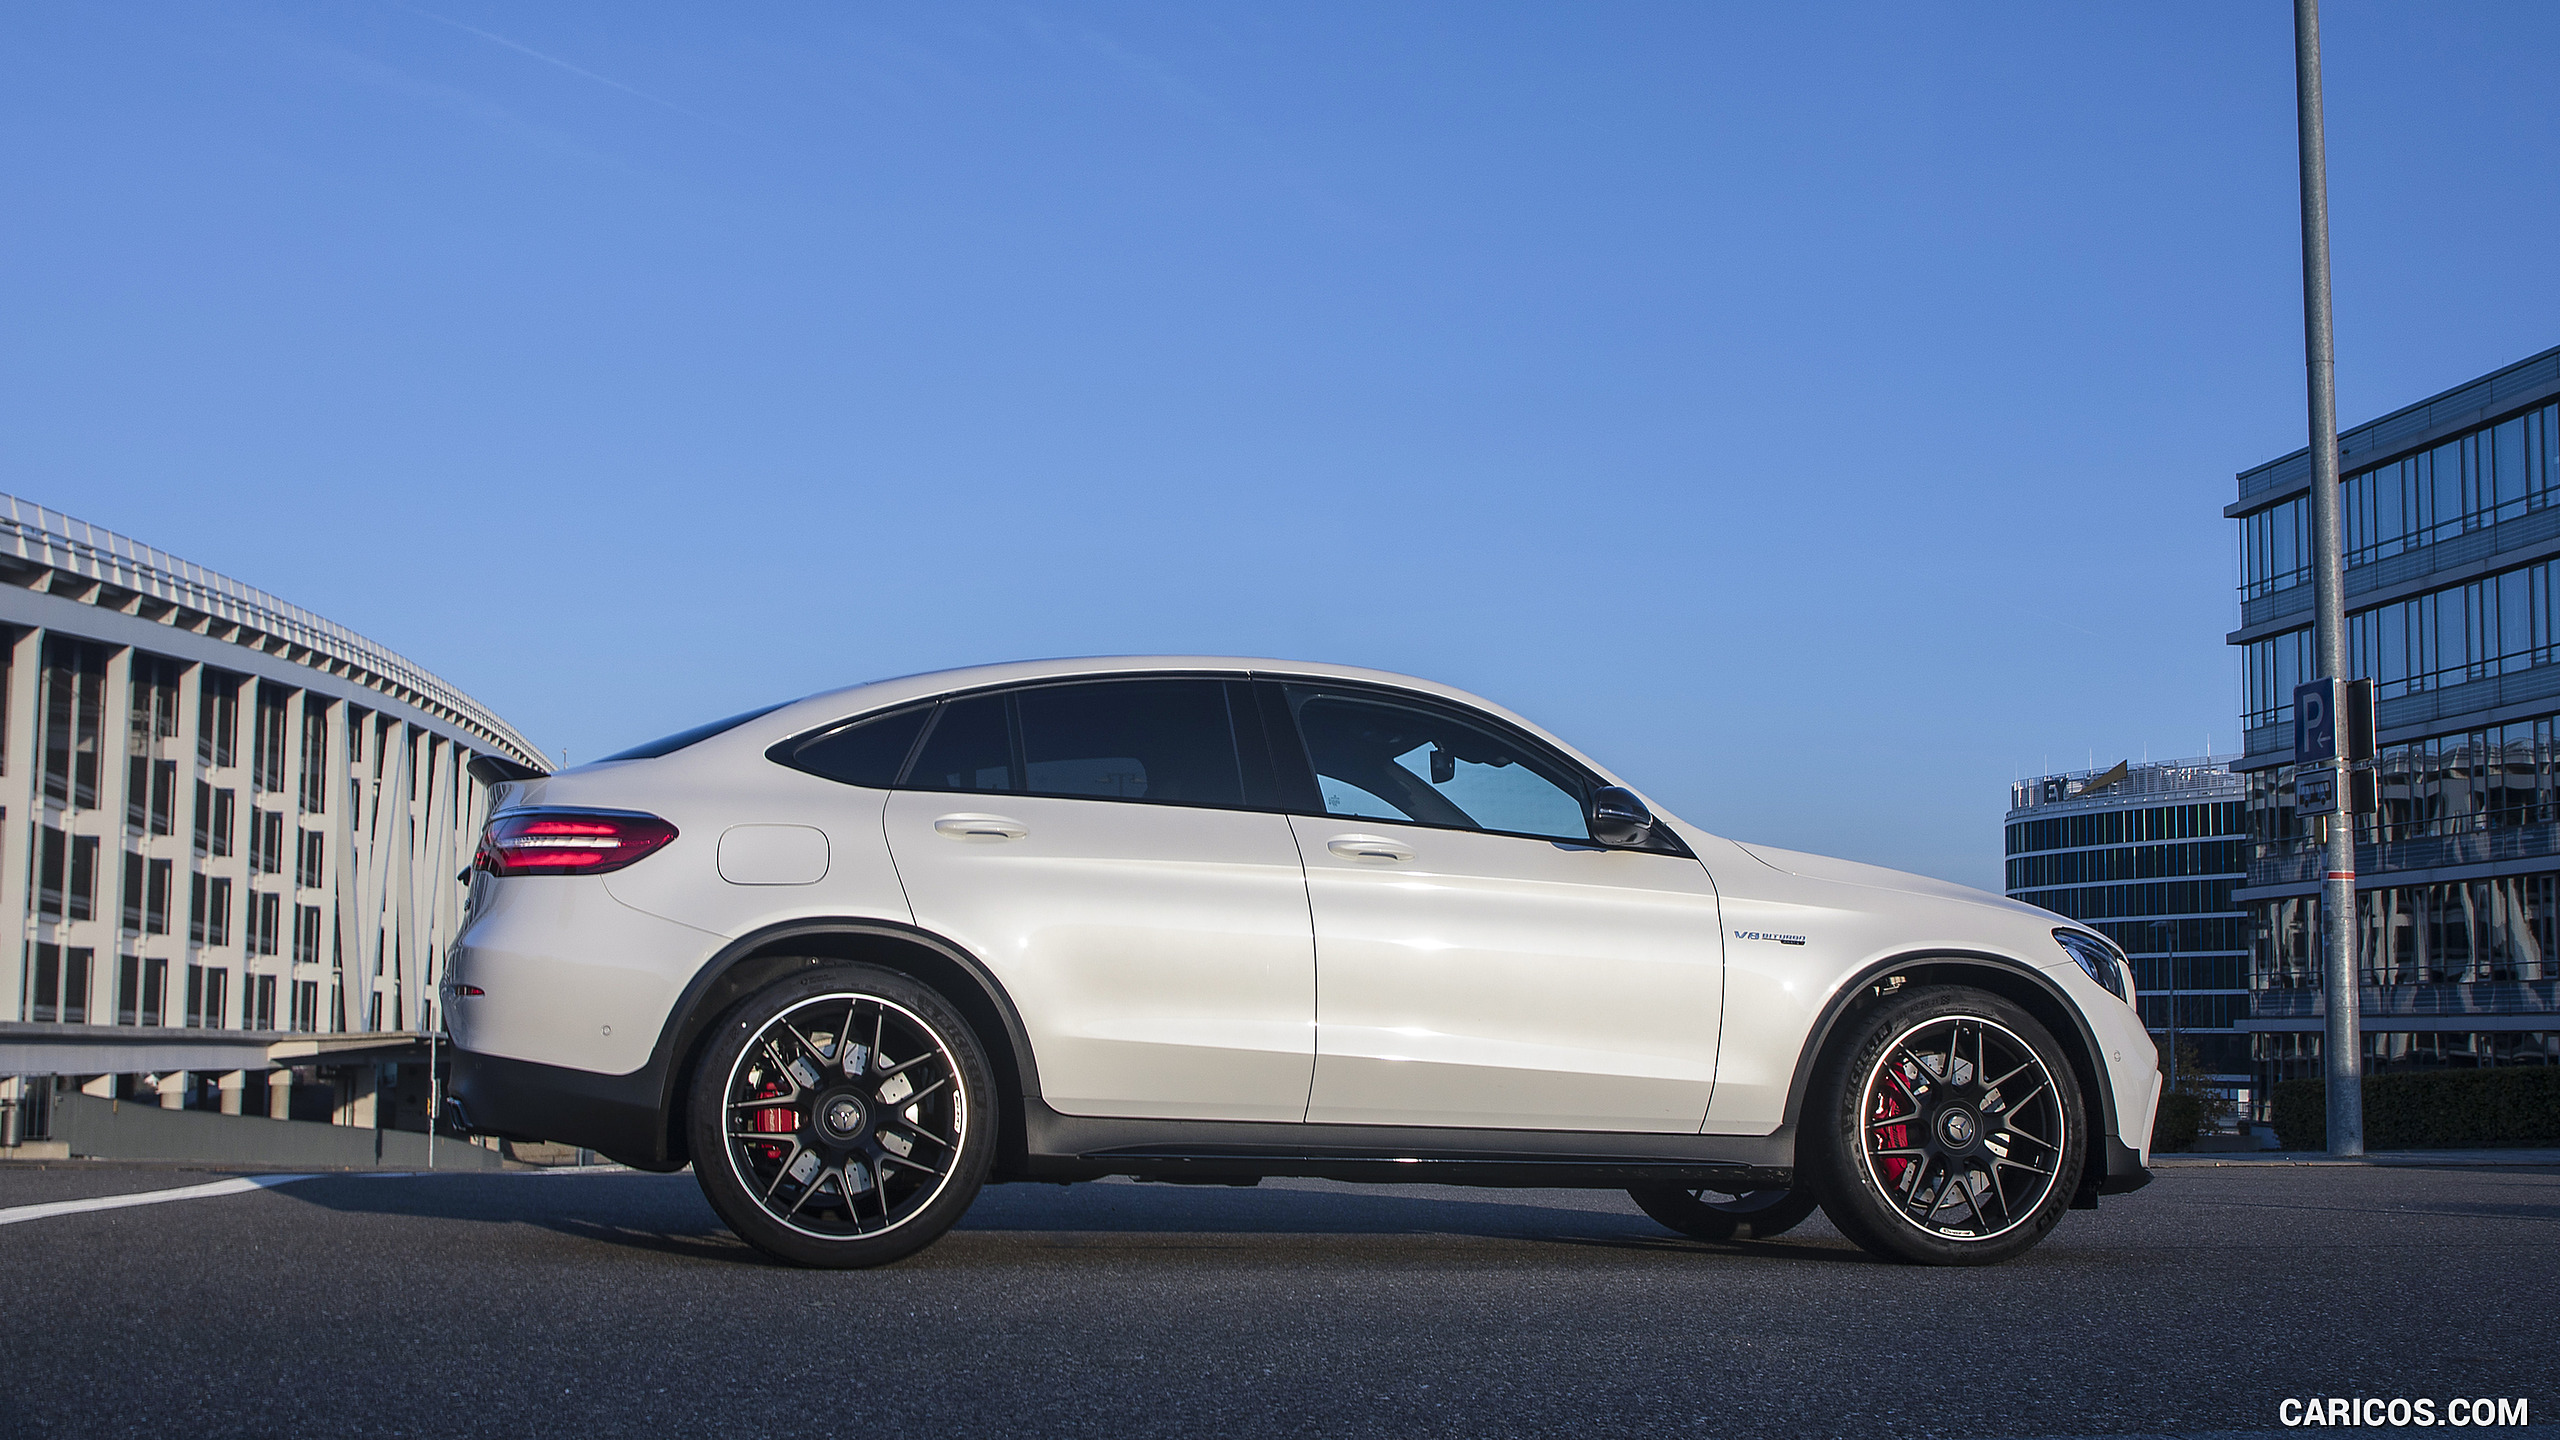 2018 Mercedes-AMG GLC 63 S Coupe - Side, #47 of 75